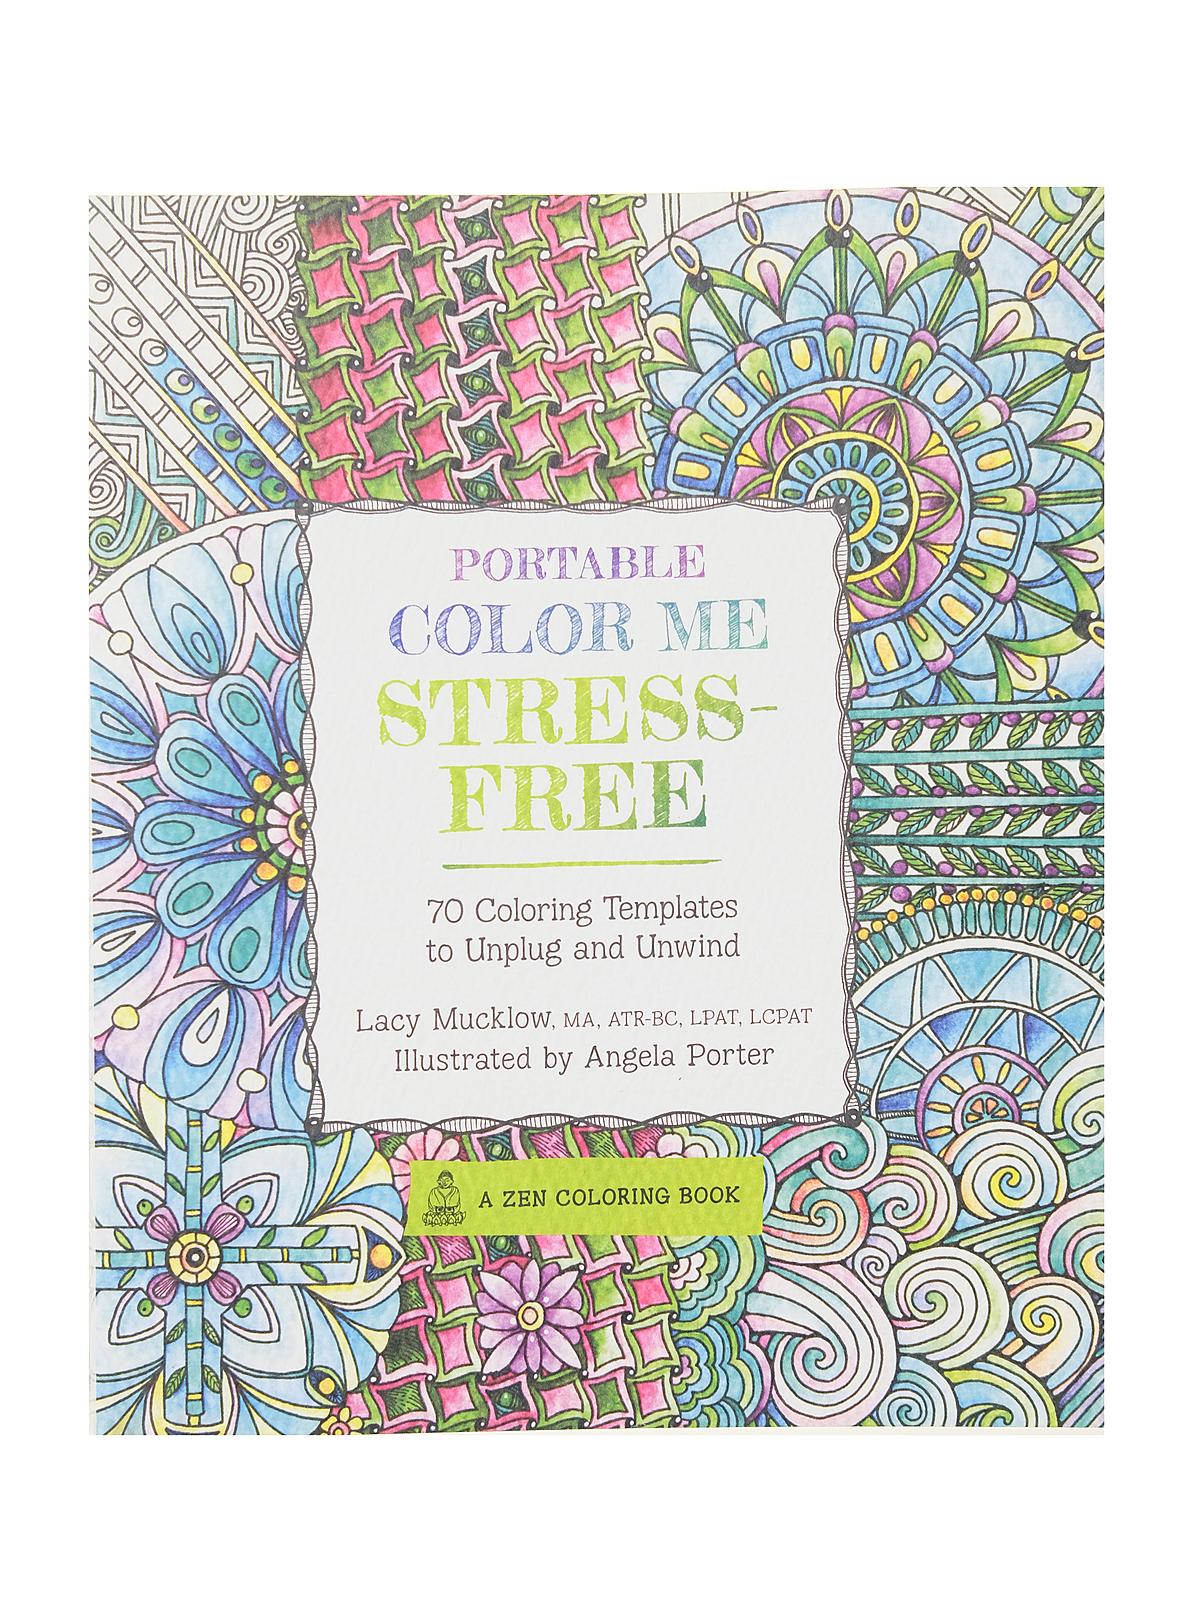 Portable Color Me Series Stress-free